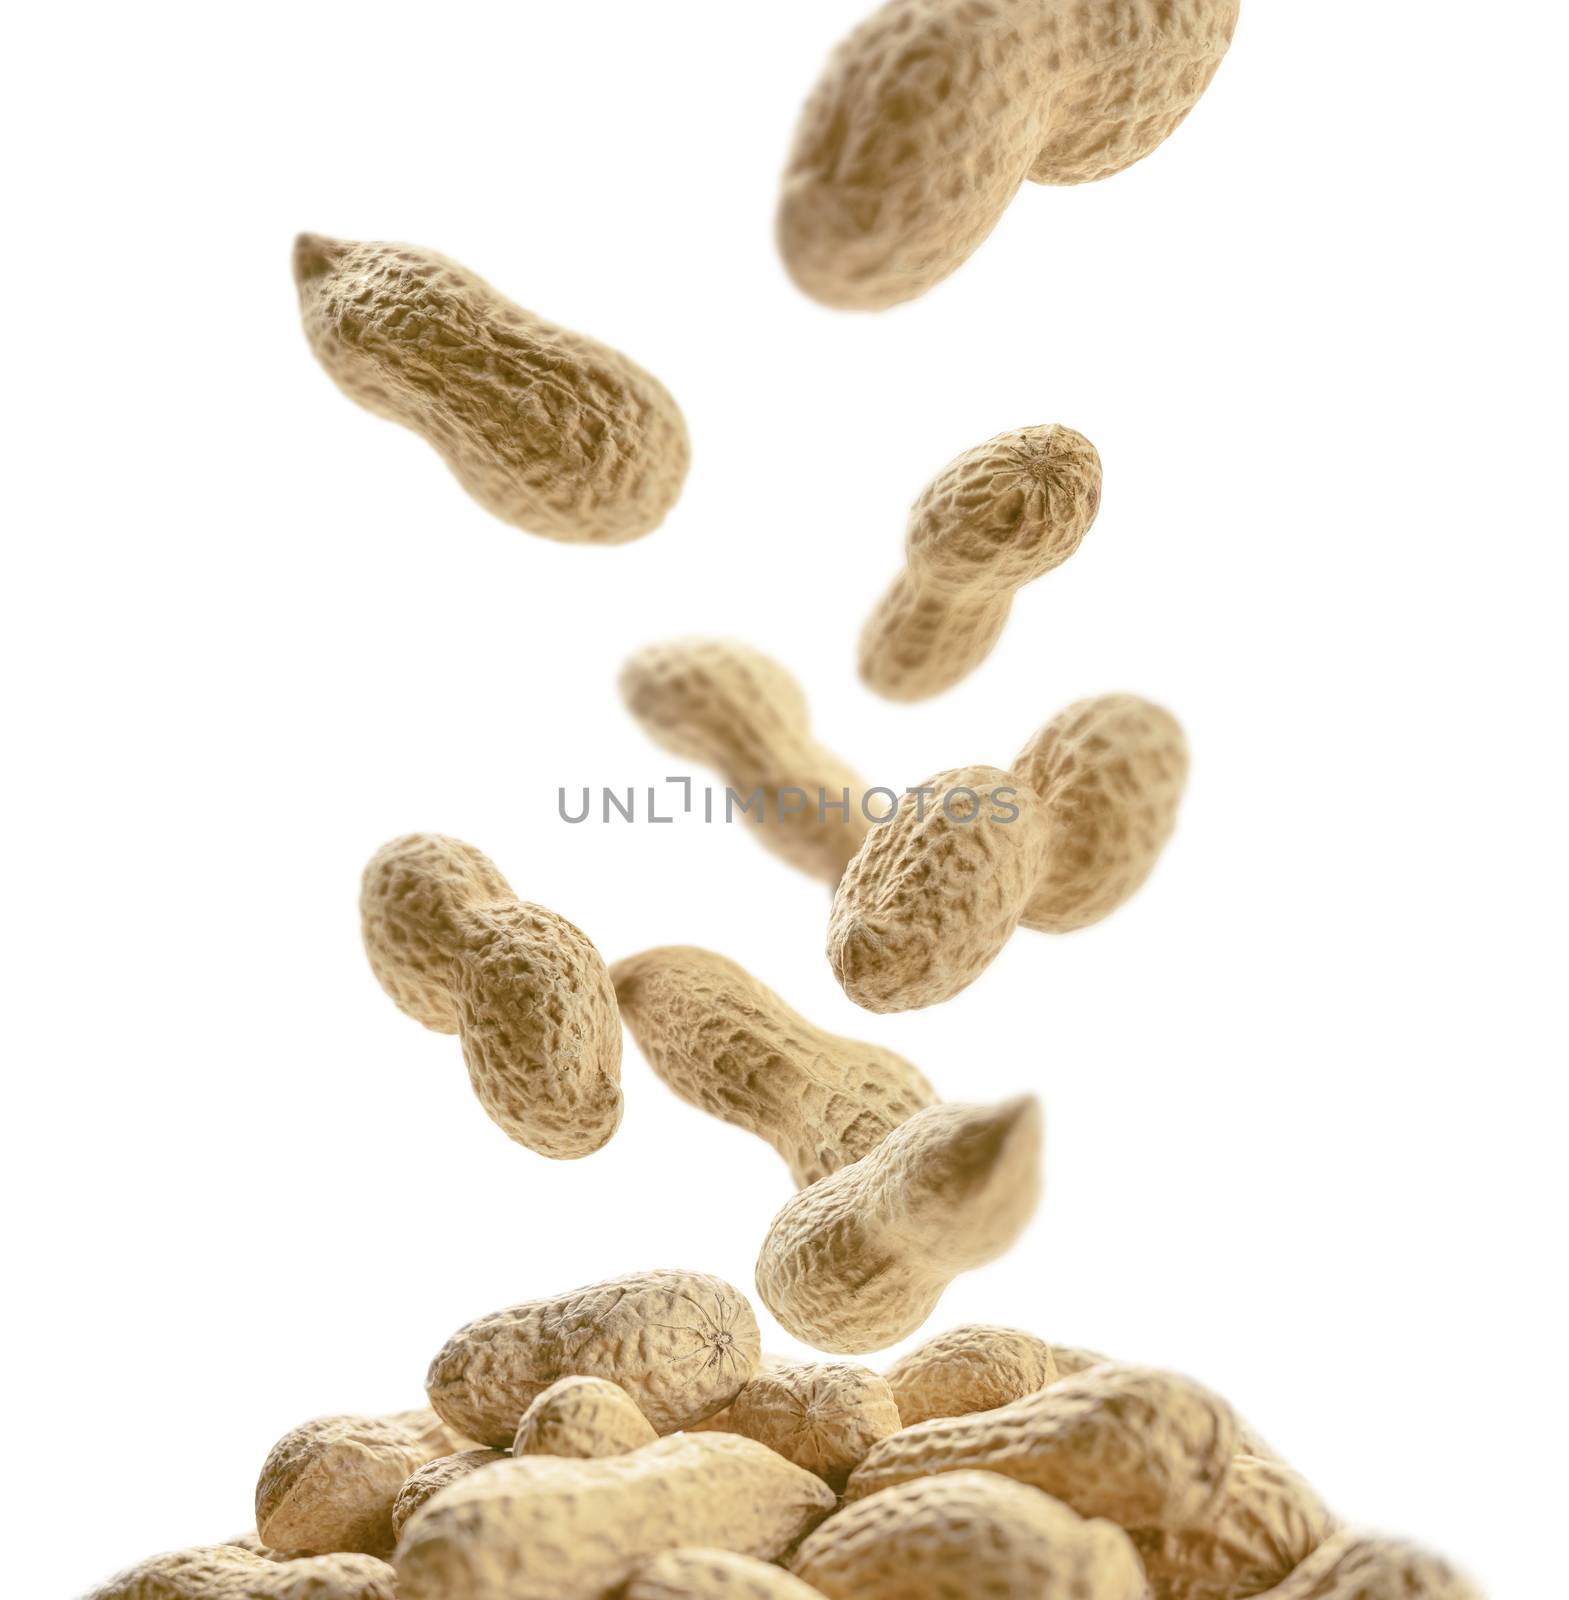 Peanuts in the shell levitate on a white background by butenkow